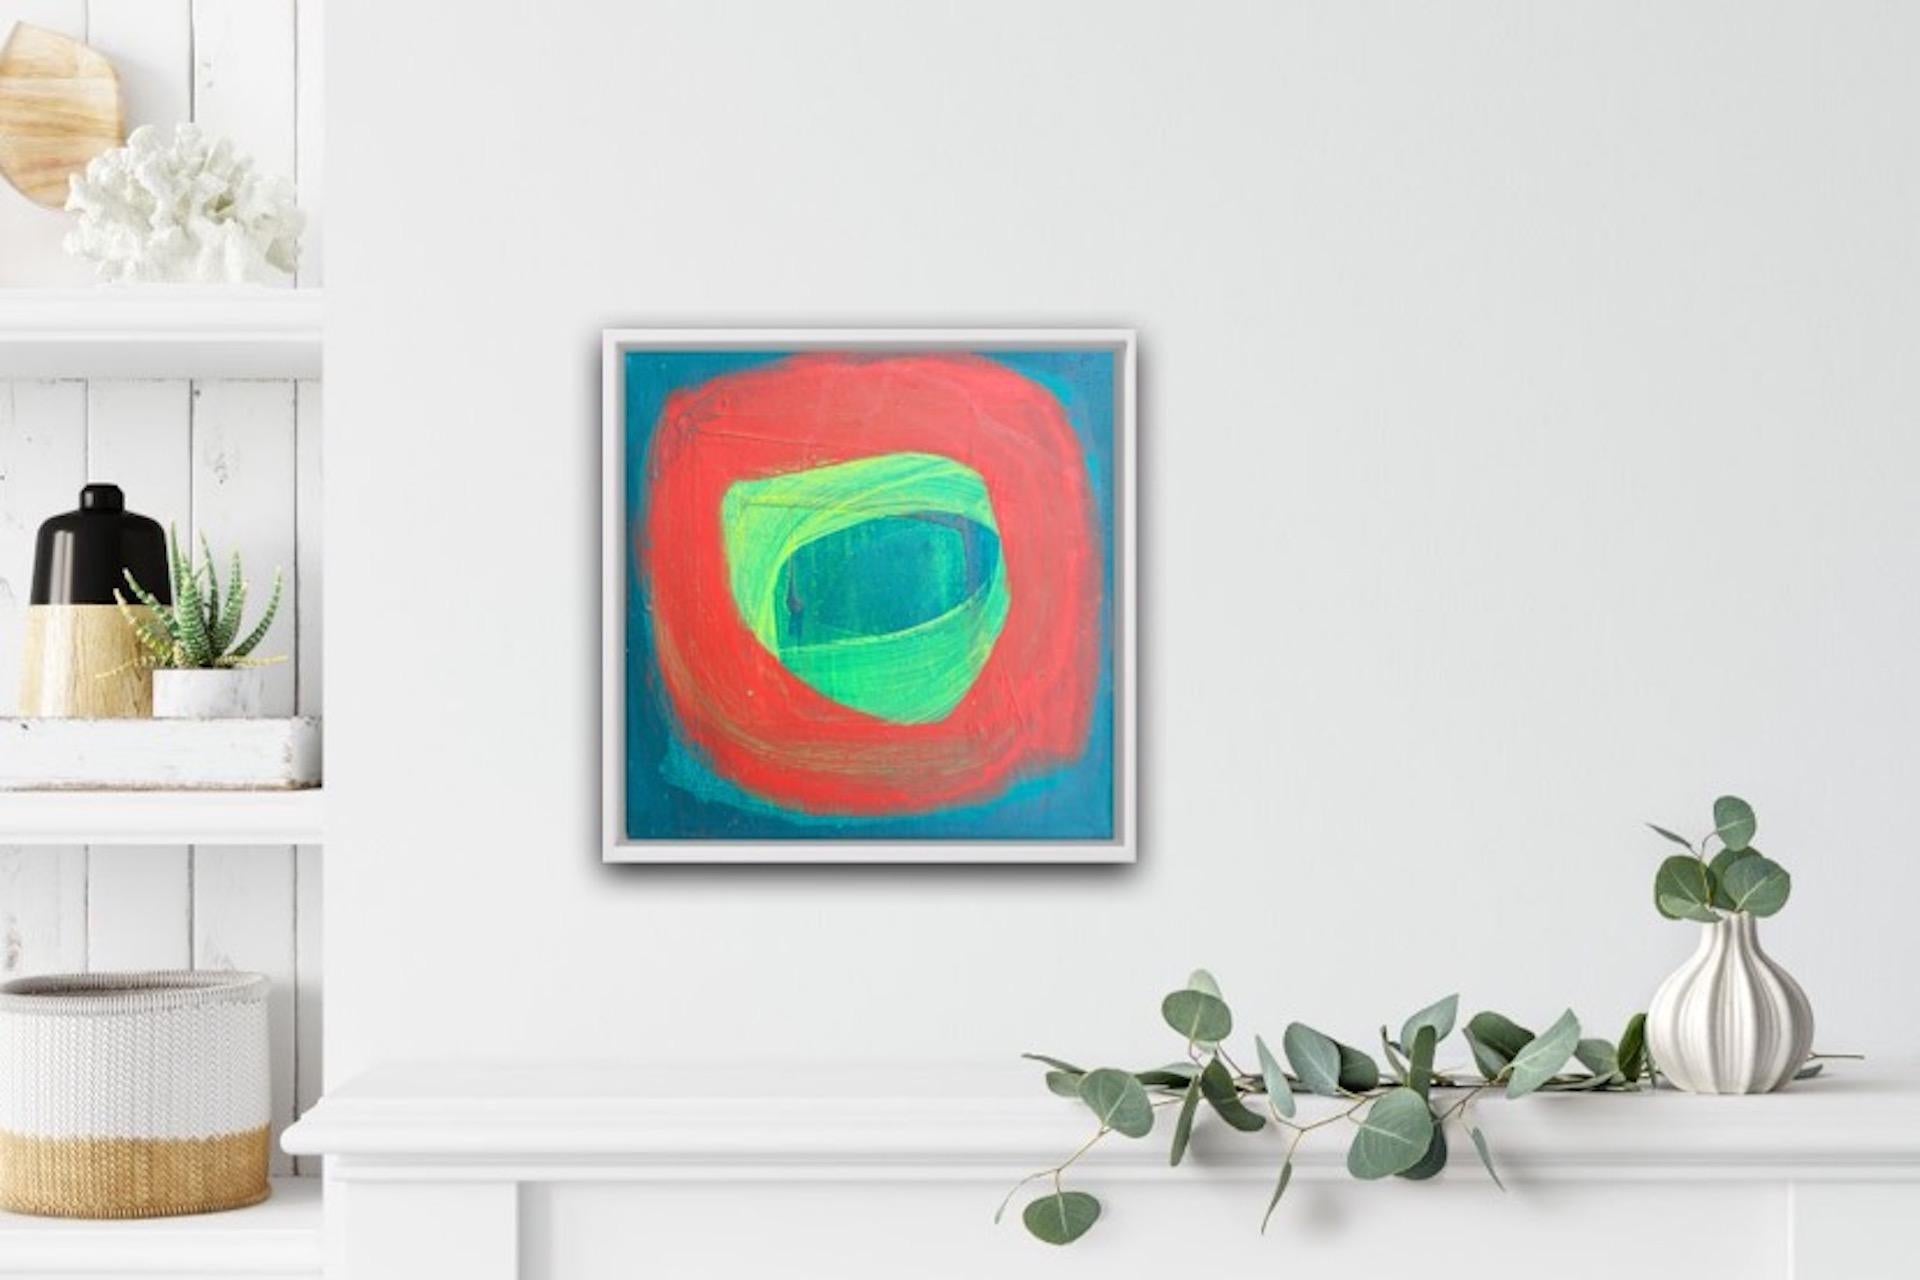 Julia Craig
Fiesta
Original Abstract Painting
Acrylic on canvas
Size: H 30cm x W 30cm
Unframed
Sold Unframed
(Please note that in situ images are purely an indication of how a piece may look).

Julia is an abstract artist whose love of colour is